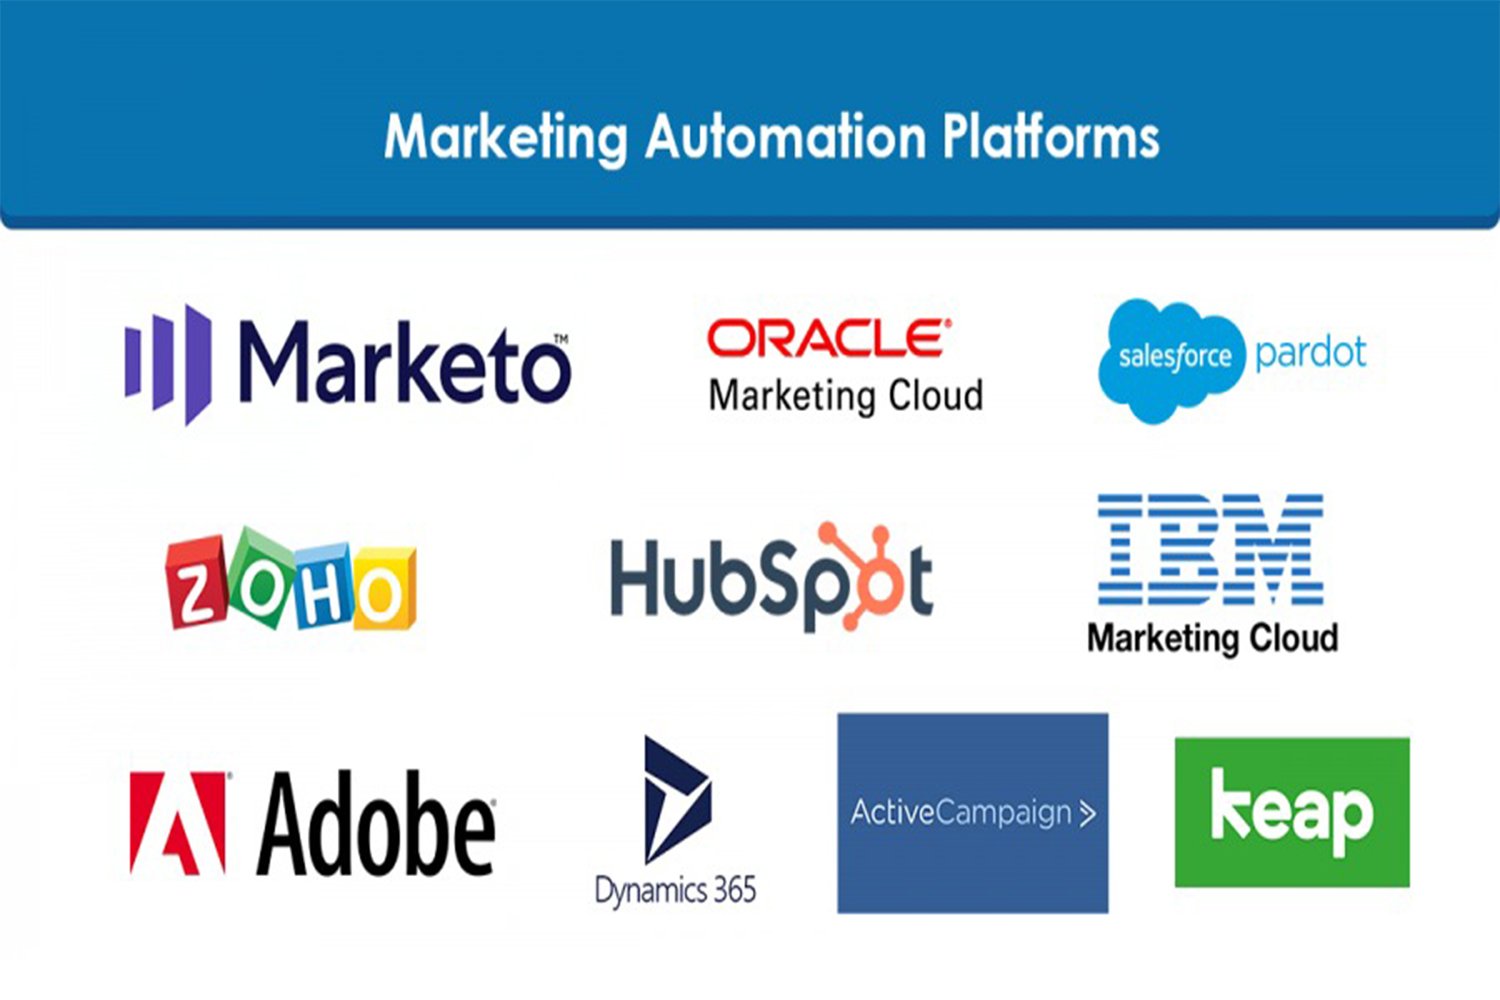  Marketing Automation Tools and Platforms